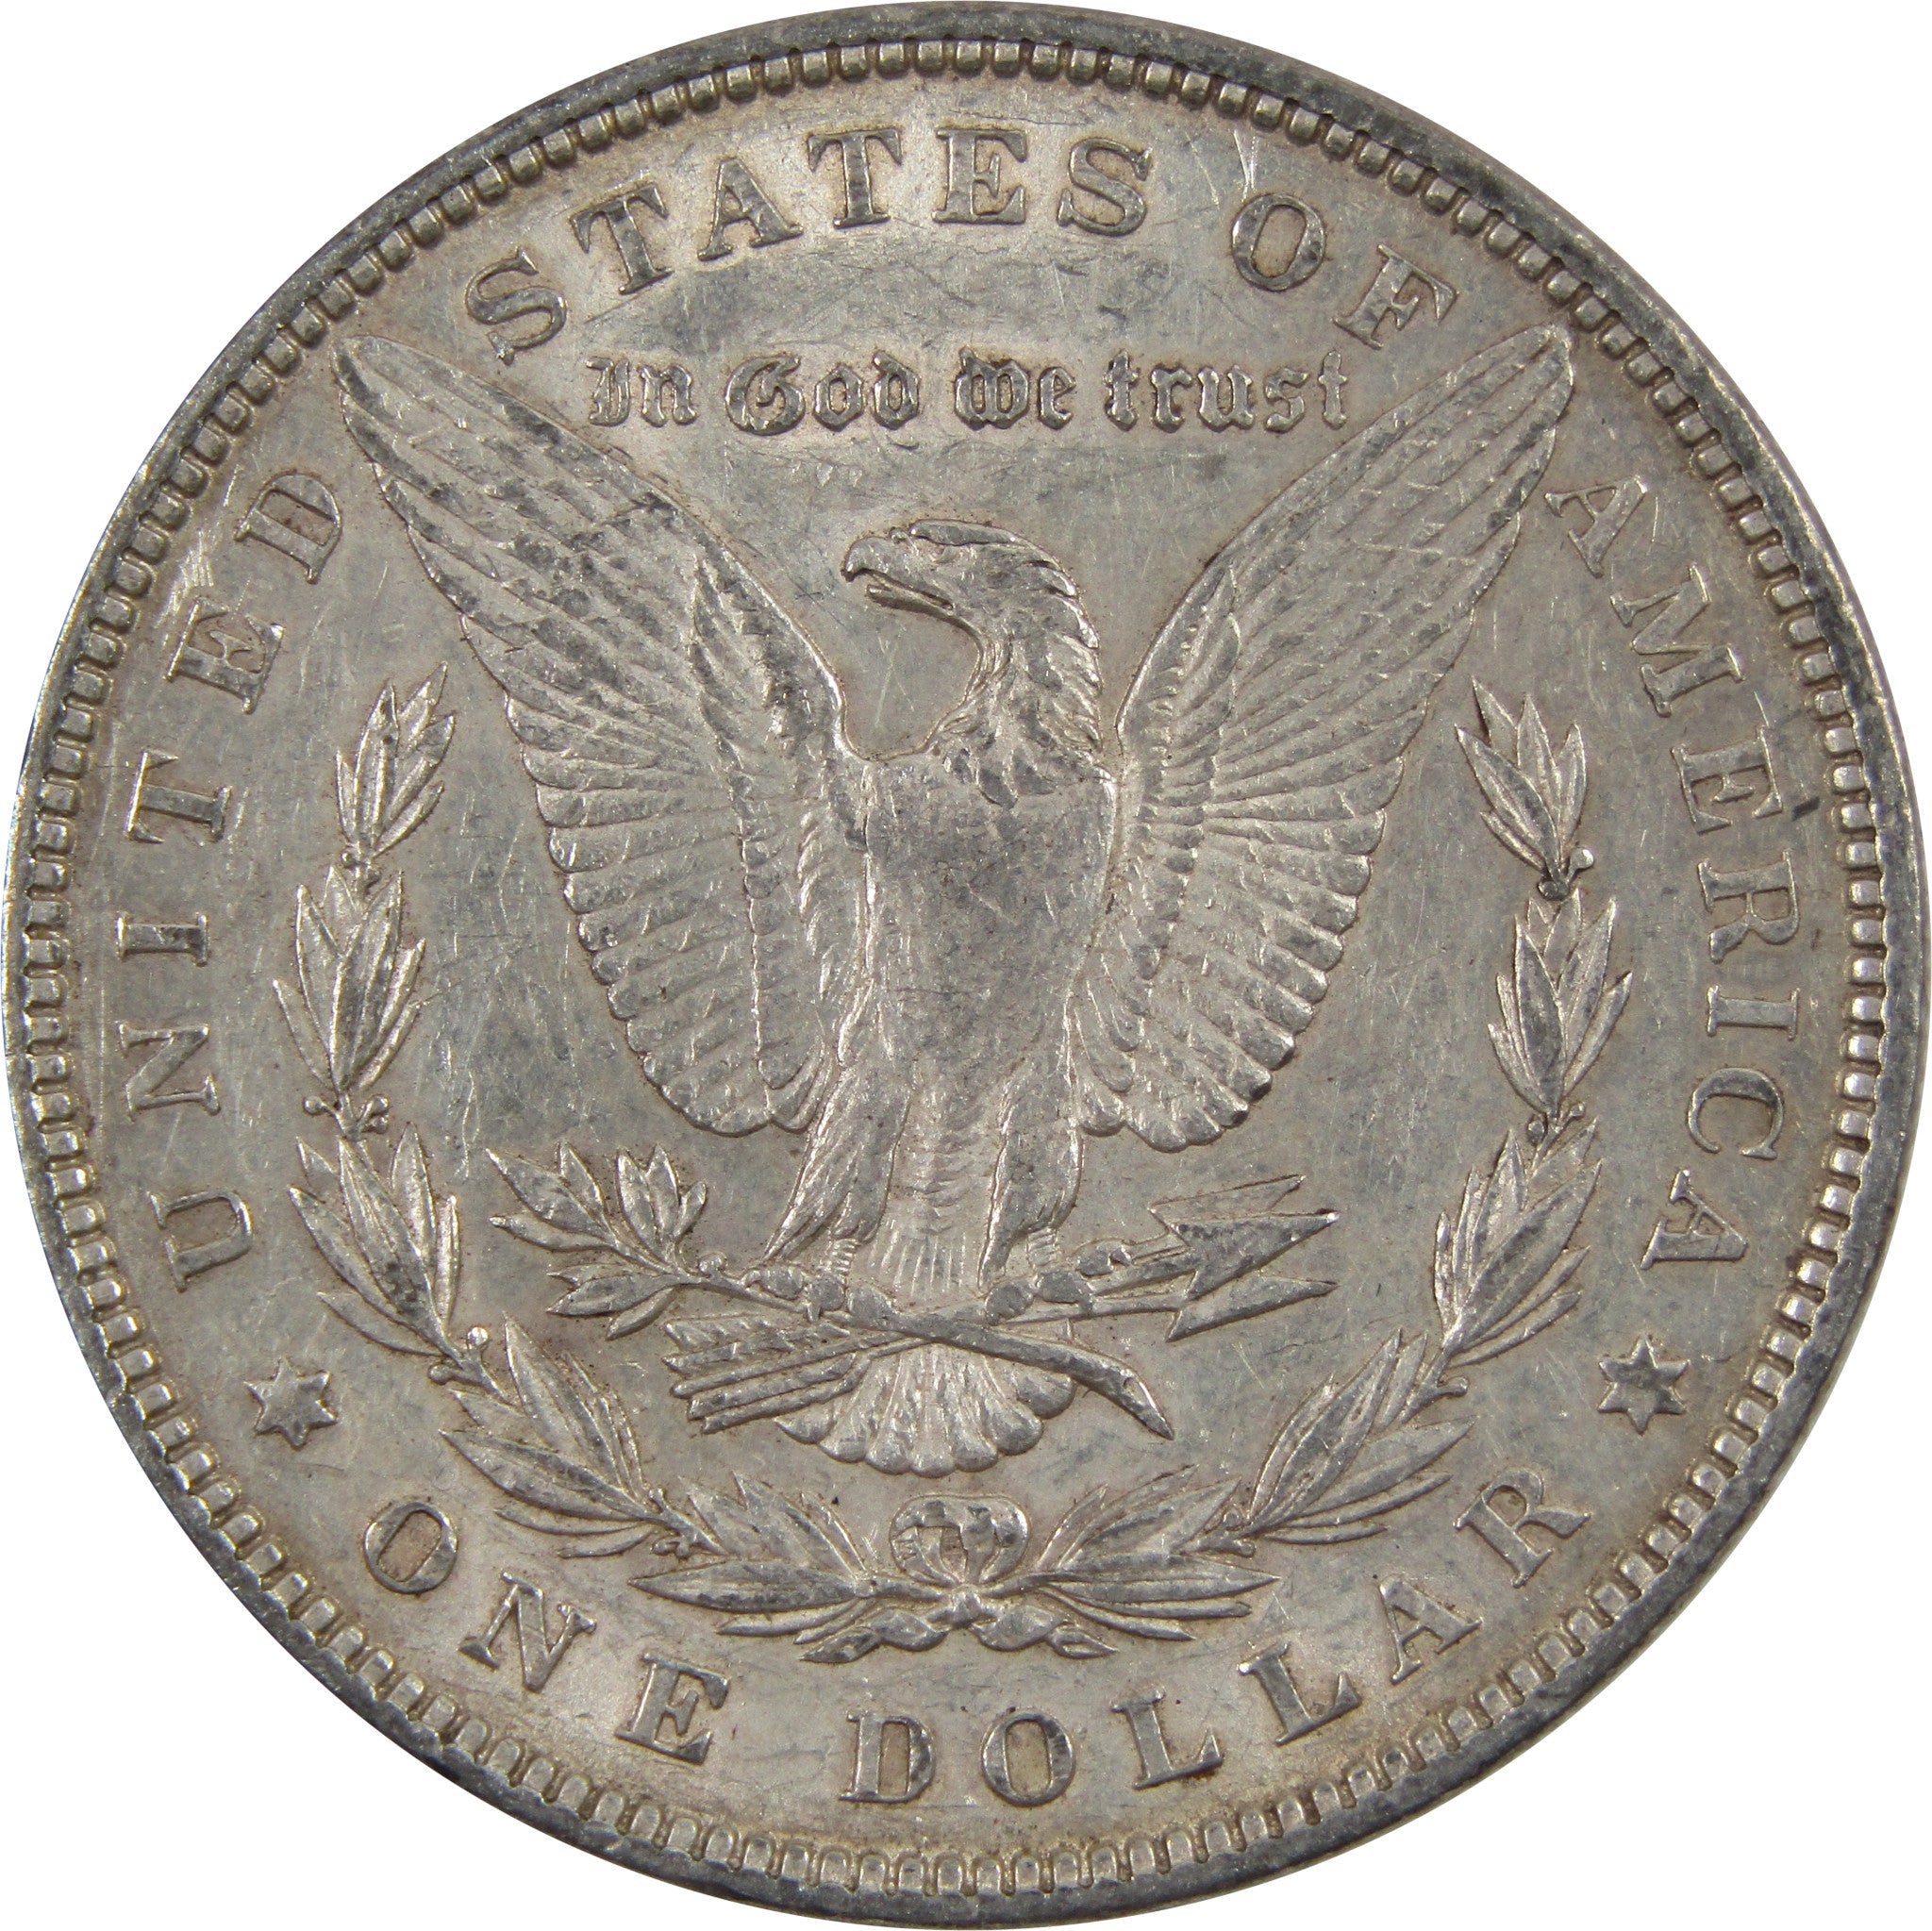 1896 Morgan Dollar AU About Uncirculated 90% Silver $1 Coin SKU:I5488 - Morgan coin - Morgan silver dollar - Morgan silver dollar for sale - Profile Coins &amp; Collectibles